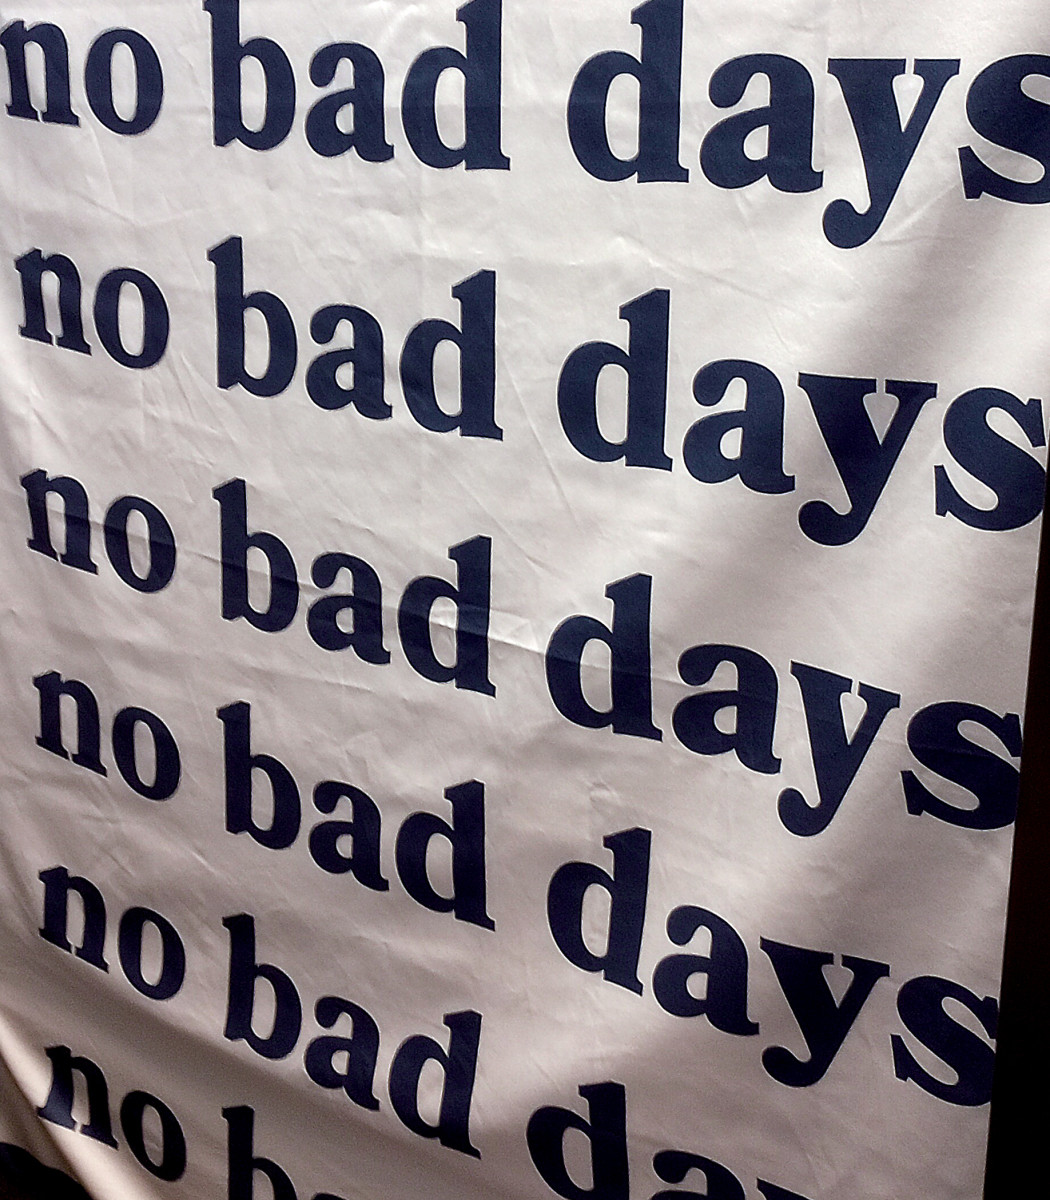 A banner hangs in a teacher cubicle to remind the teacher to not have bad days.